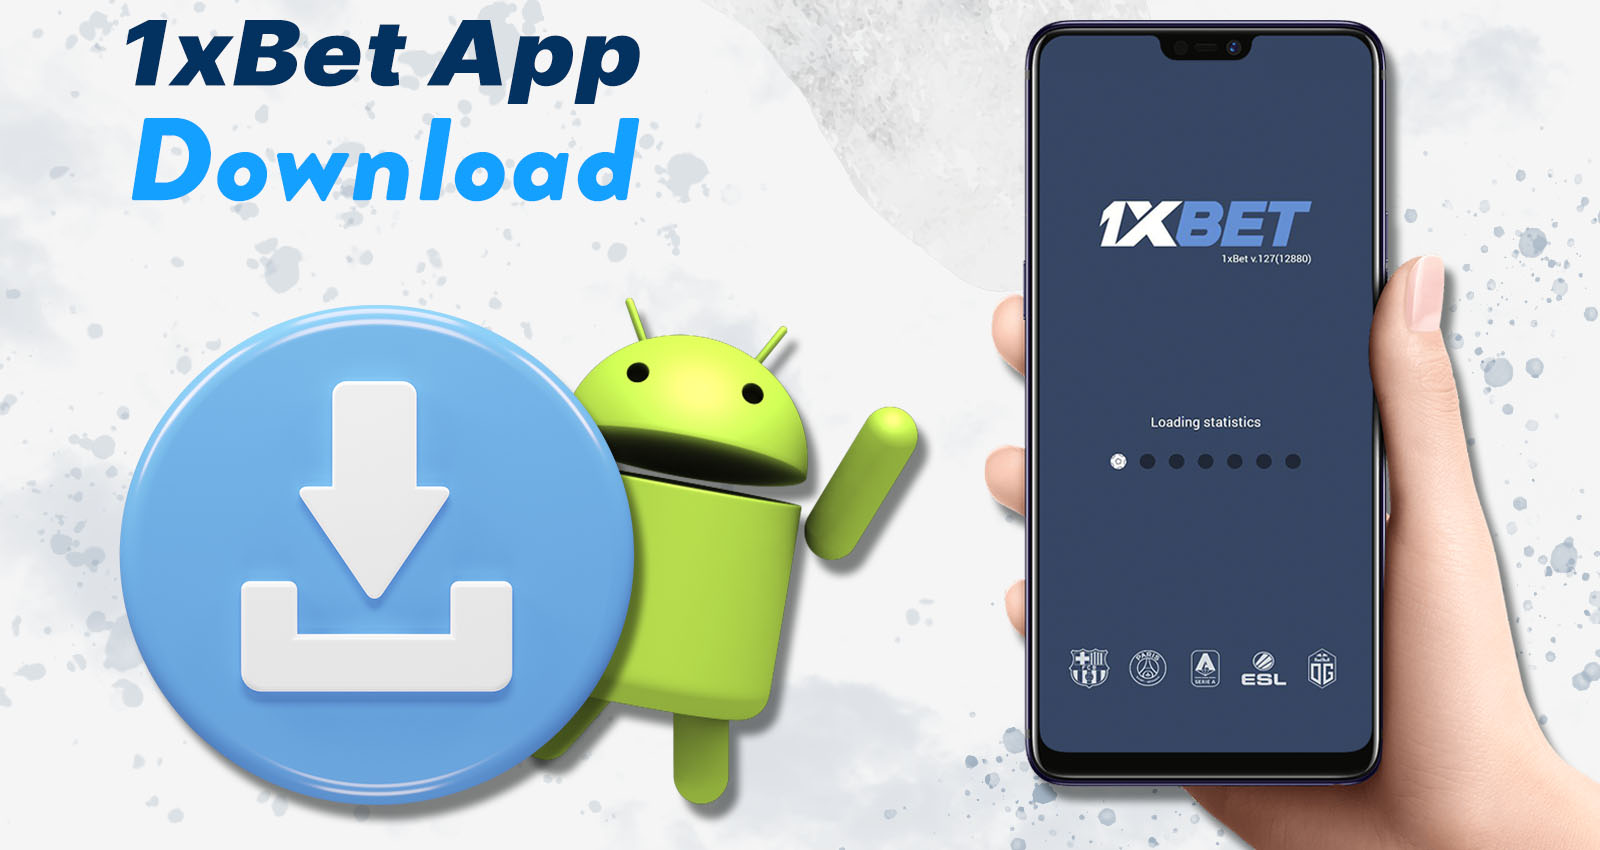 Download the 1xBet app for Android